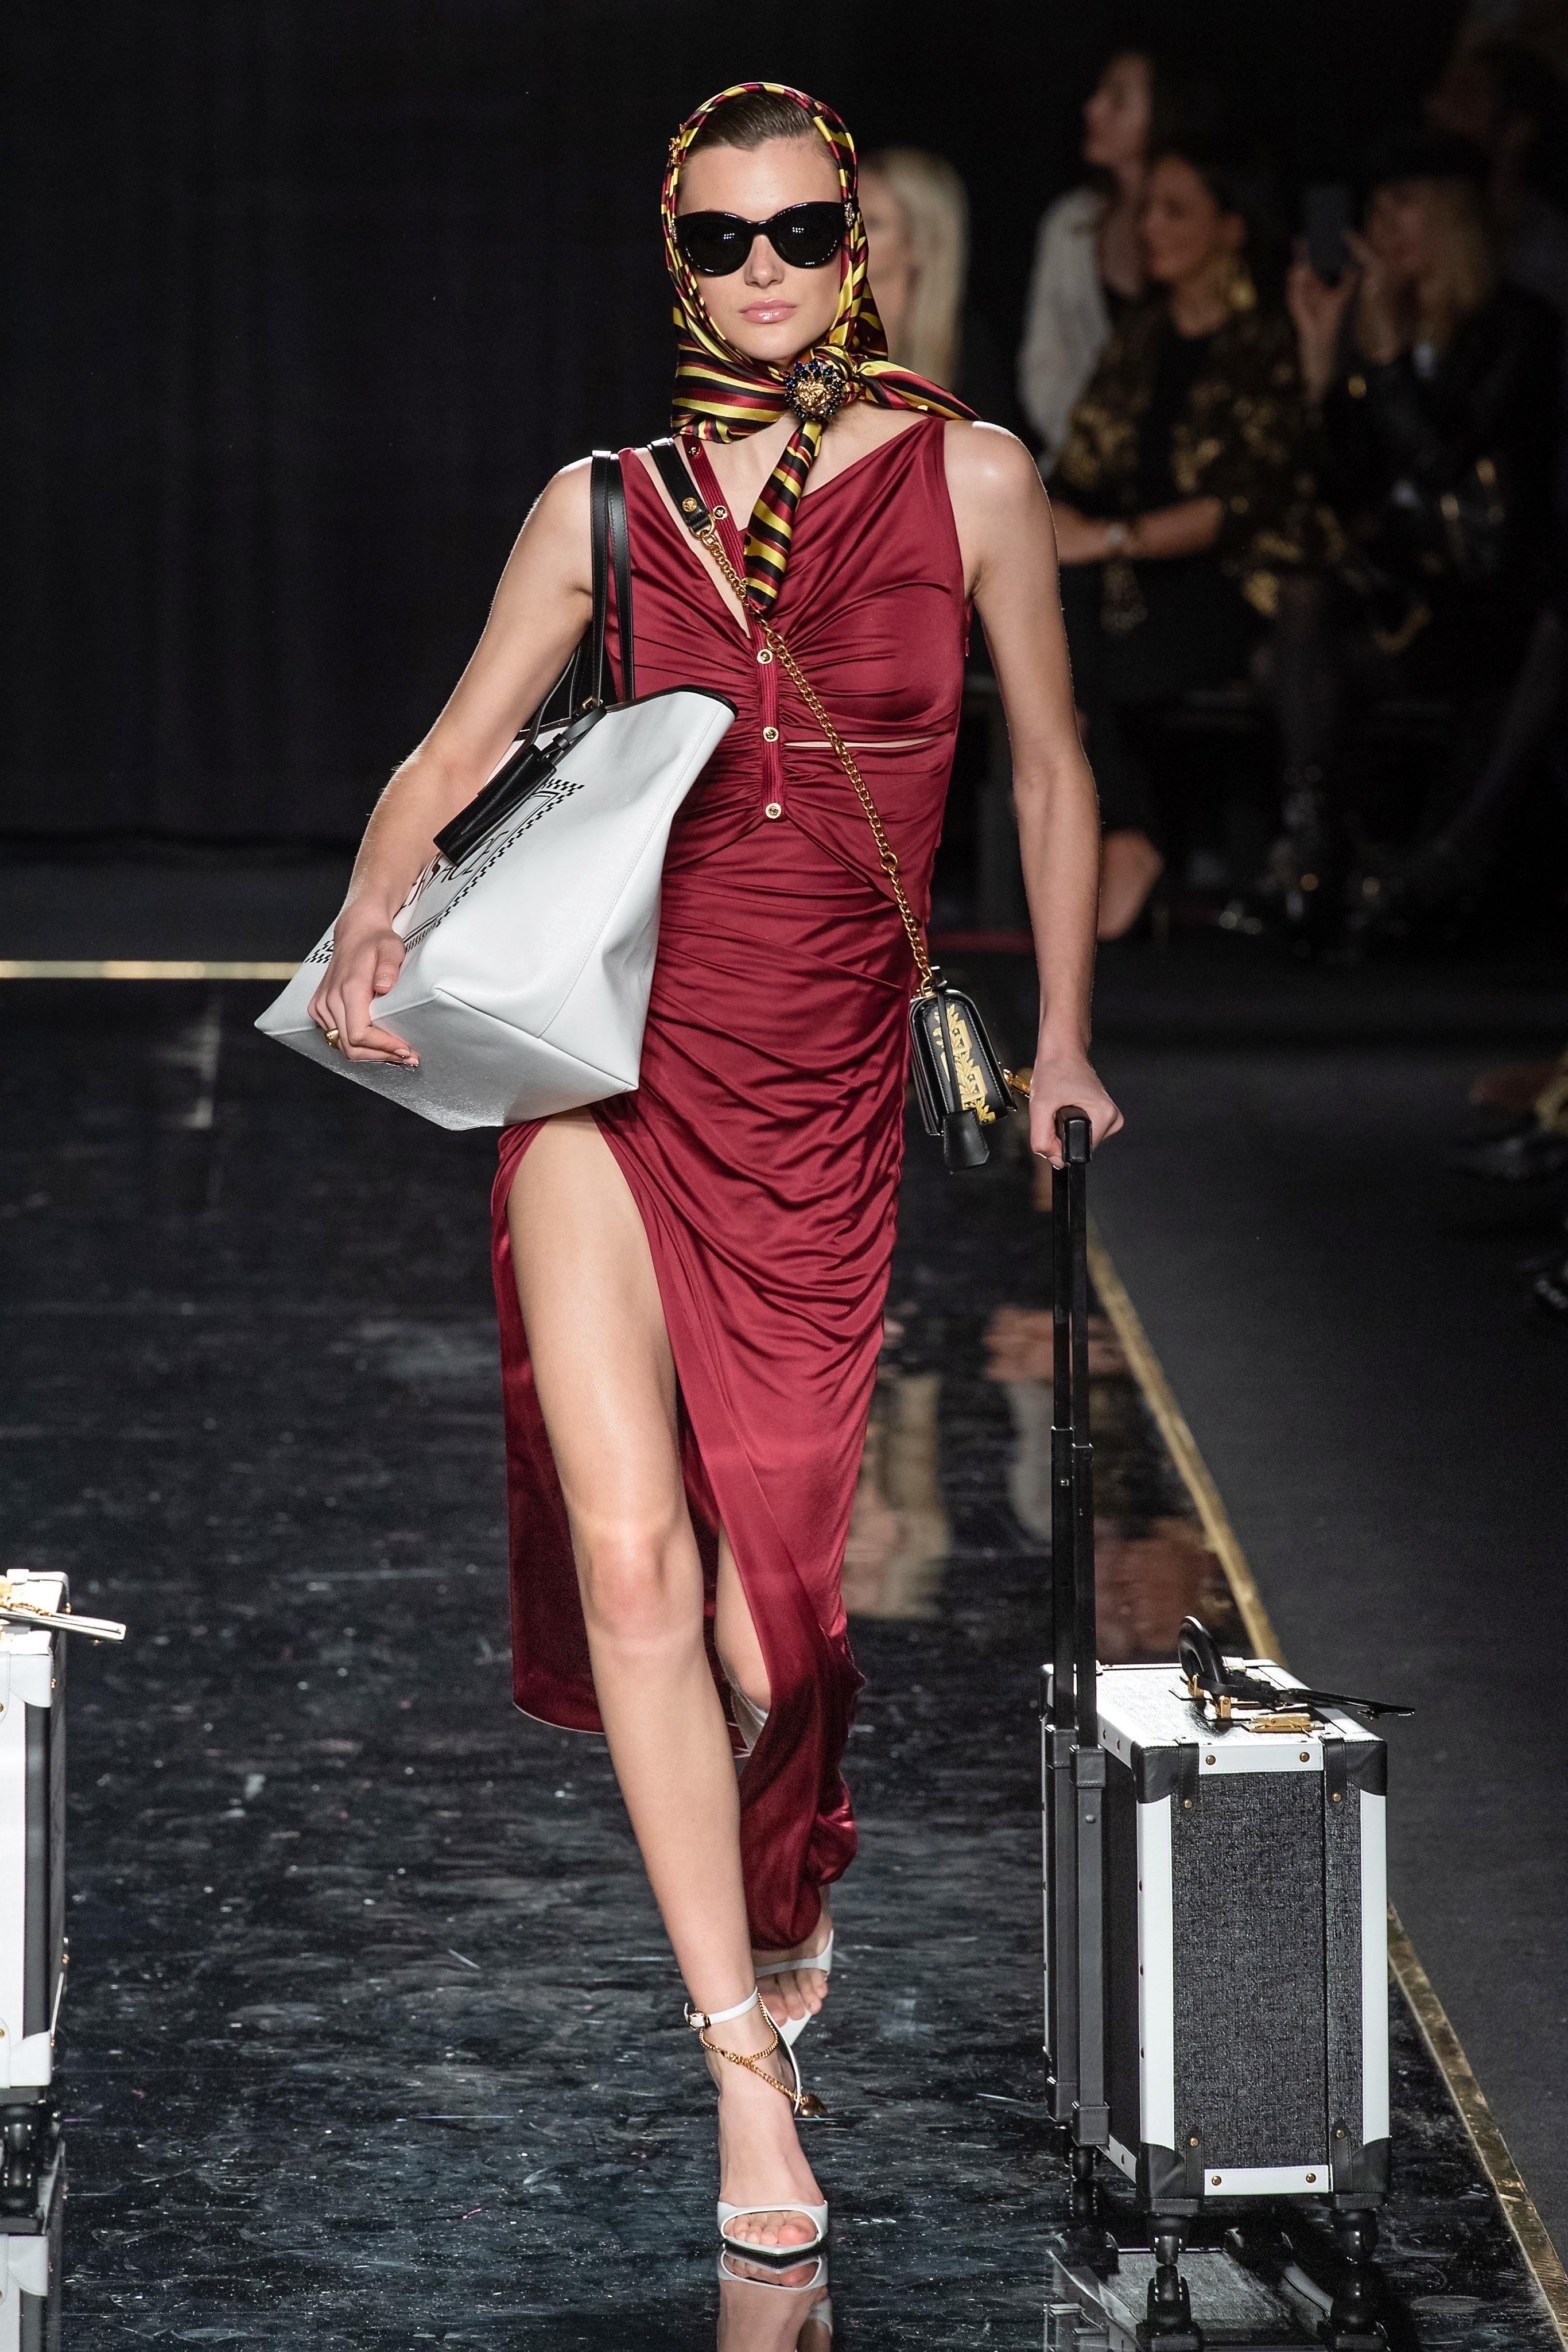  VERSACE

Collection 2019 

Burgundy asymmetric draped dress from Versace featuring straps with
 gold-tone Medusa rivets

Side slit
Full length
Size 36 or US XS

Made in Italy

Brand new!

 Comes with Versace hanger and Versace garment bag

 100%